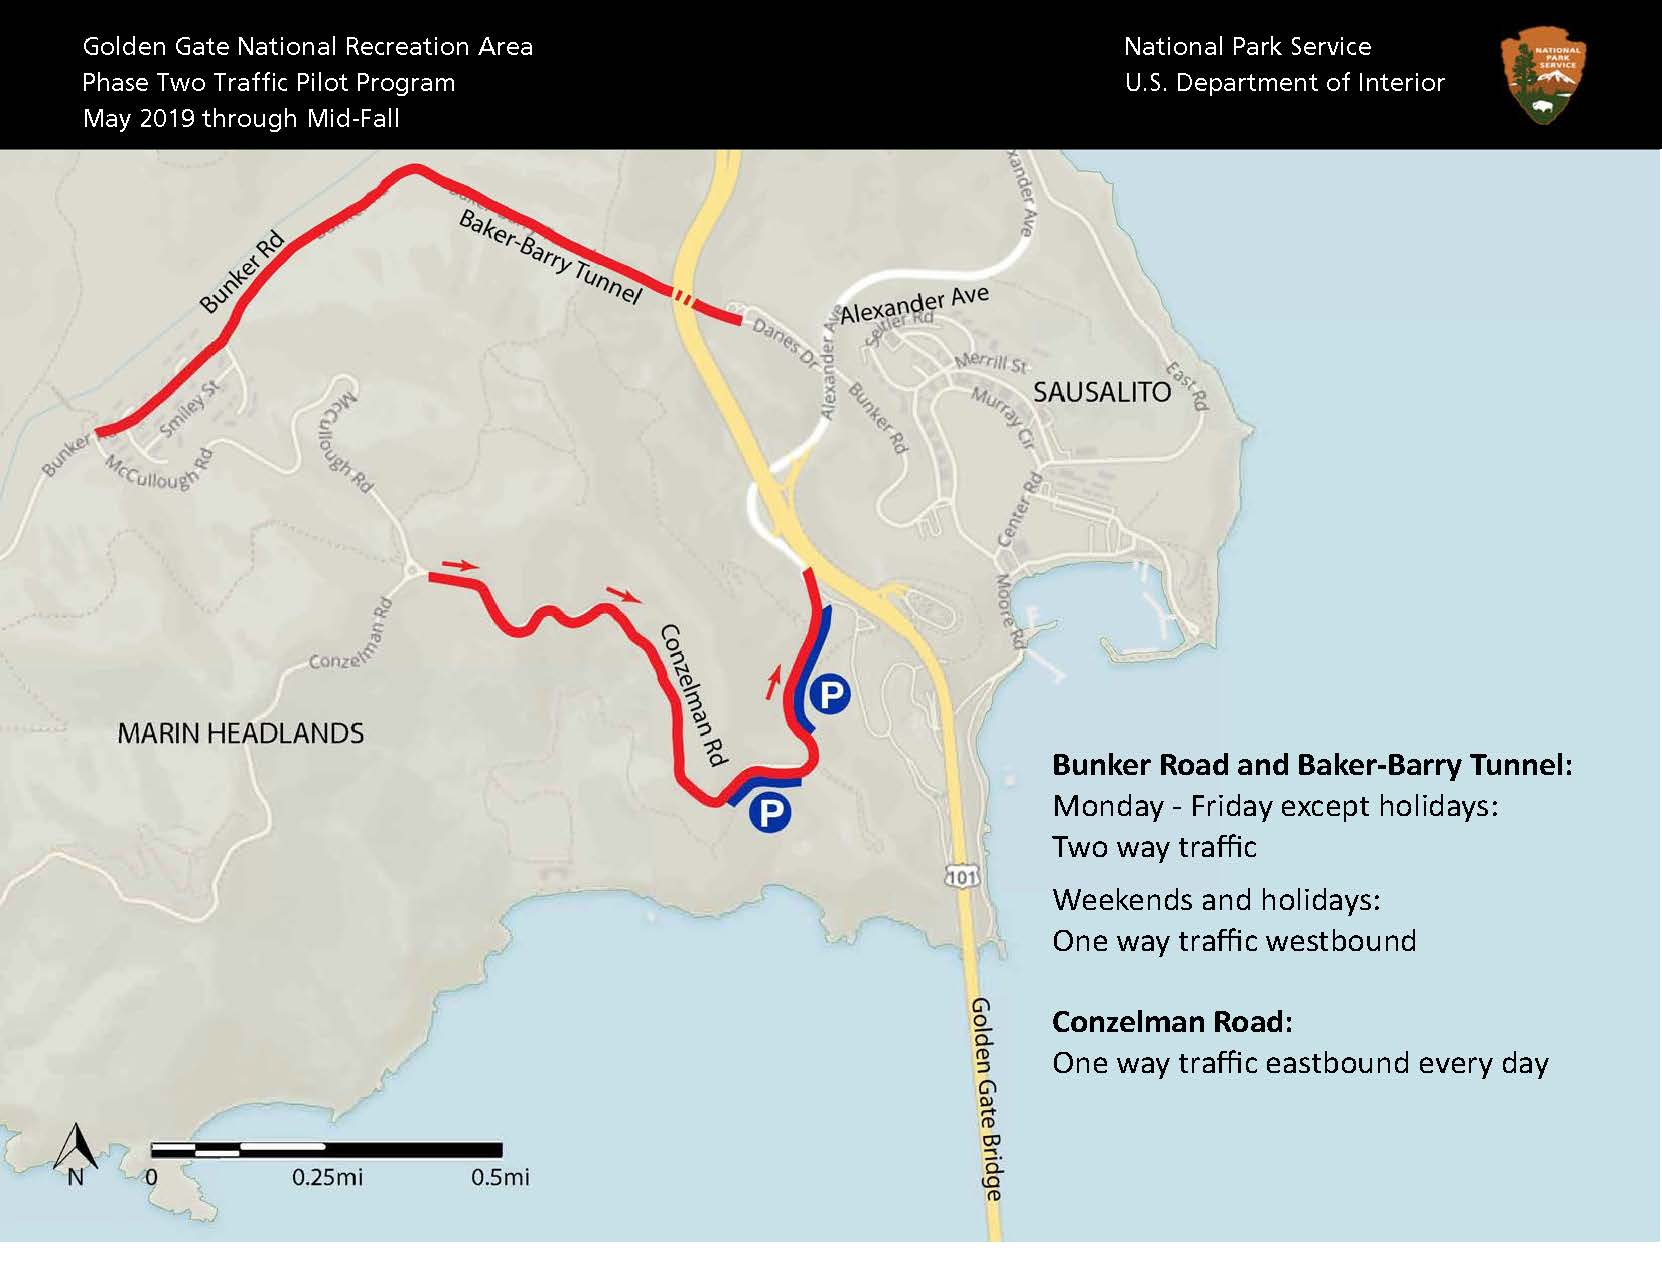 Map of the Marin Headlands with Bunker Road and Baker-Barry Tunnel and a portion of Conzelman Road highlighted.